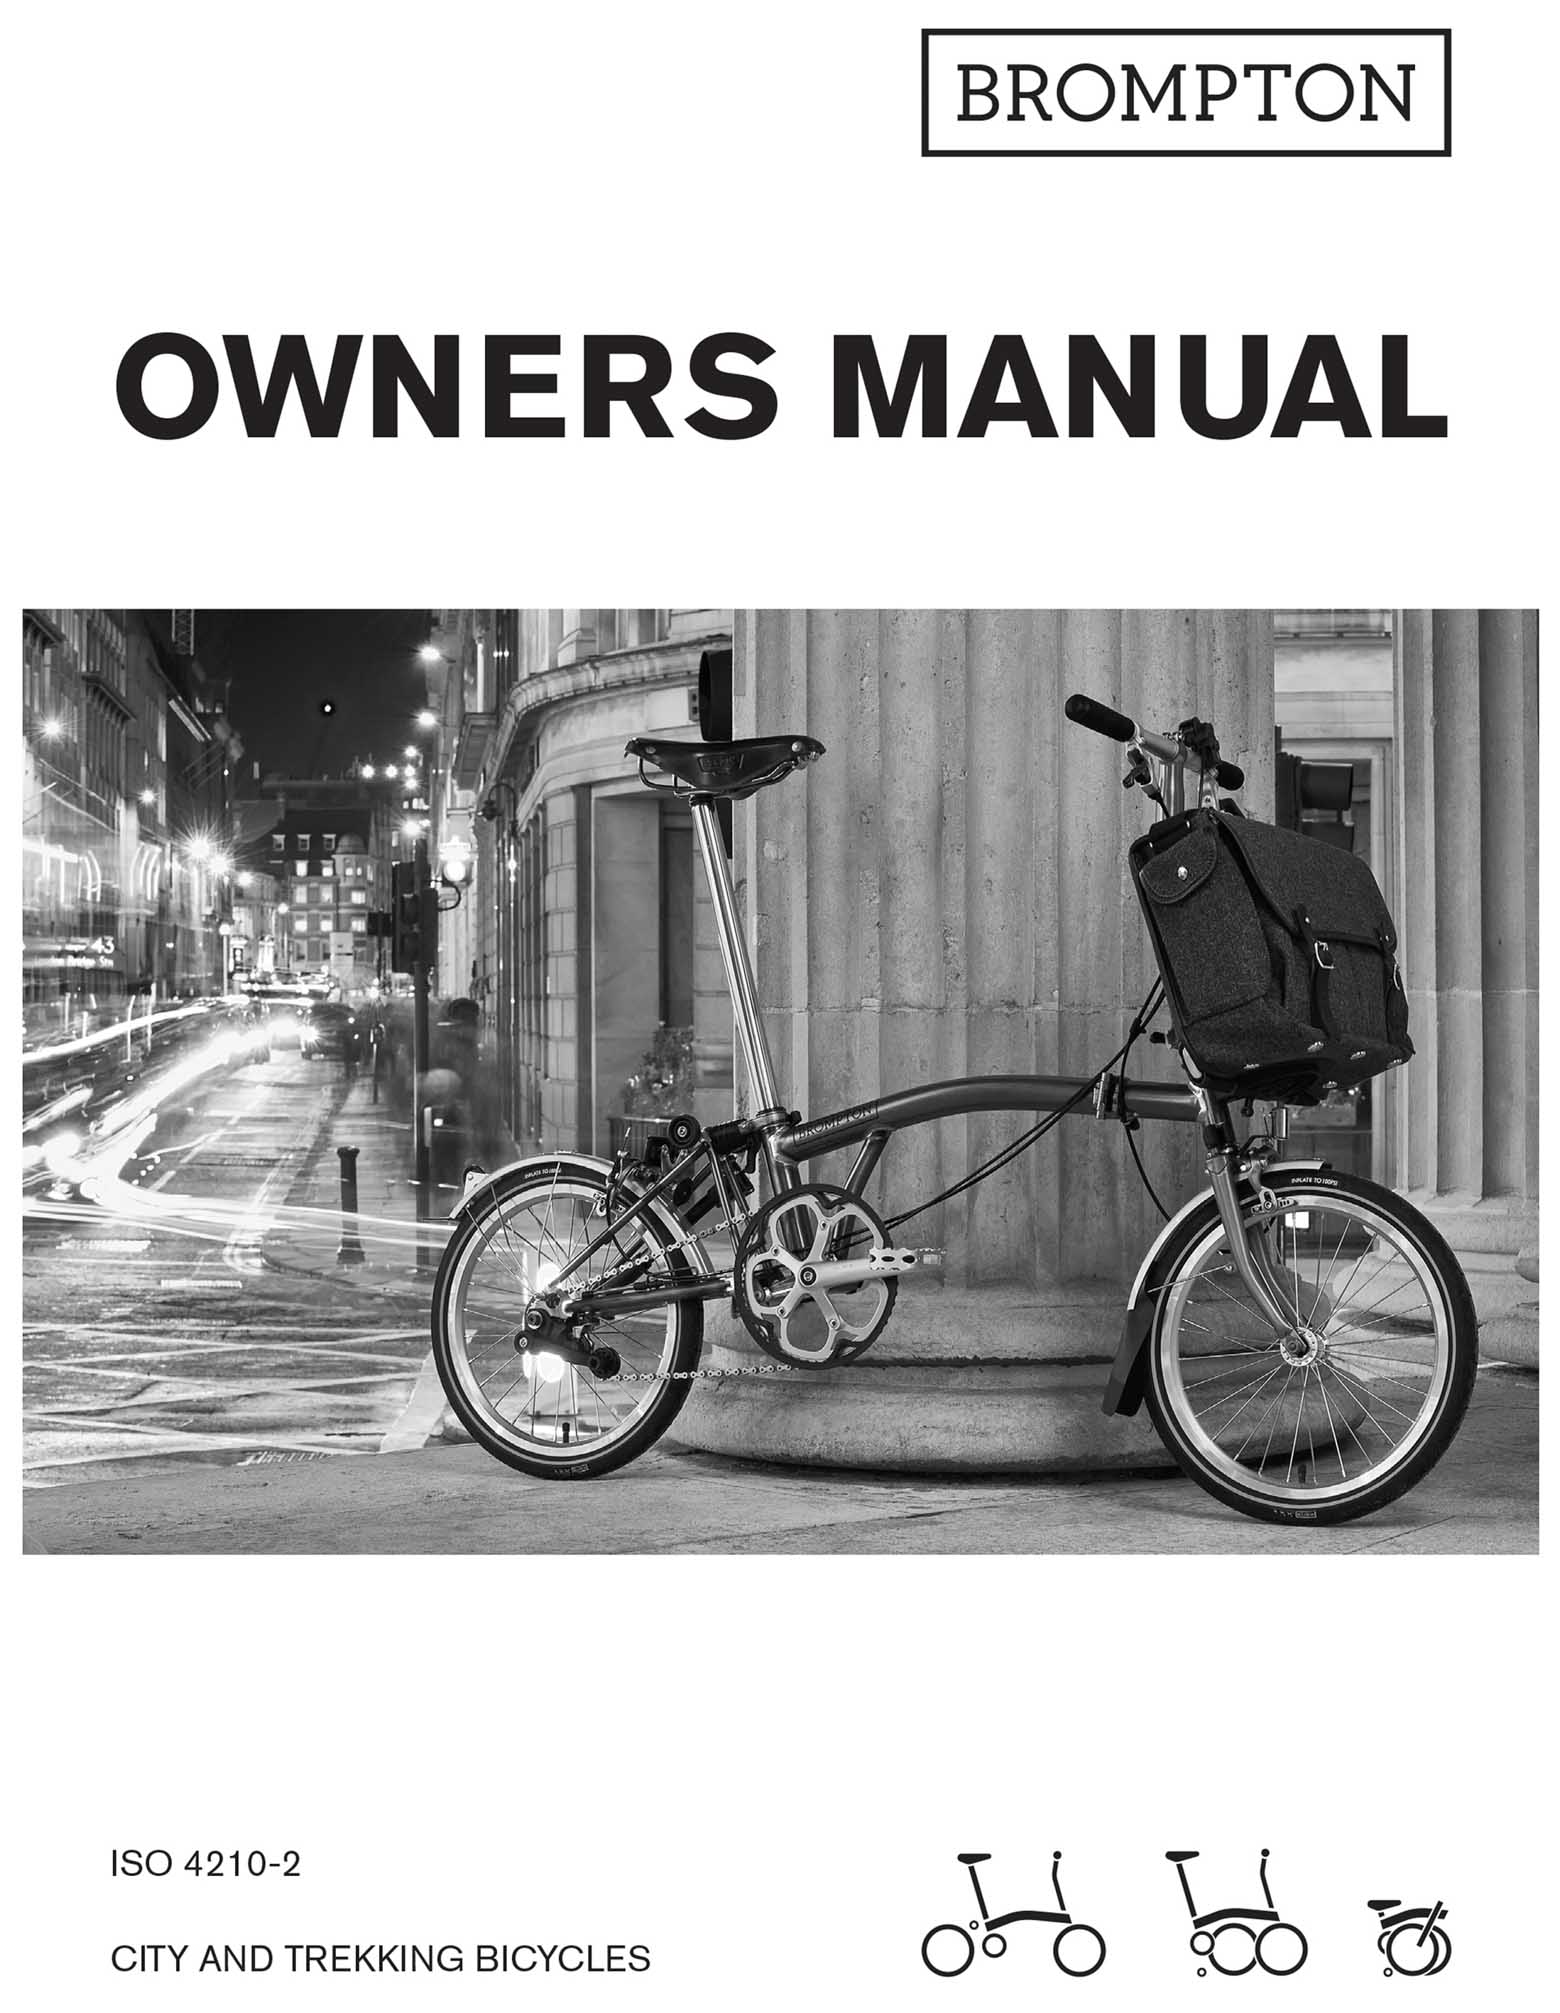 Brompton - Owners Manual 2017 page 01 main image